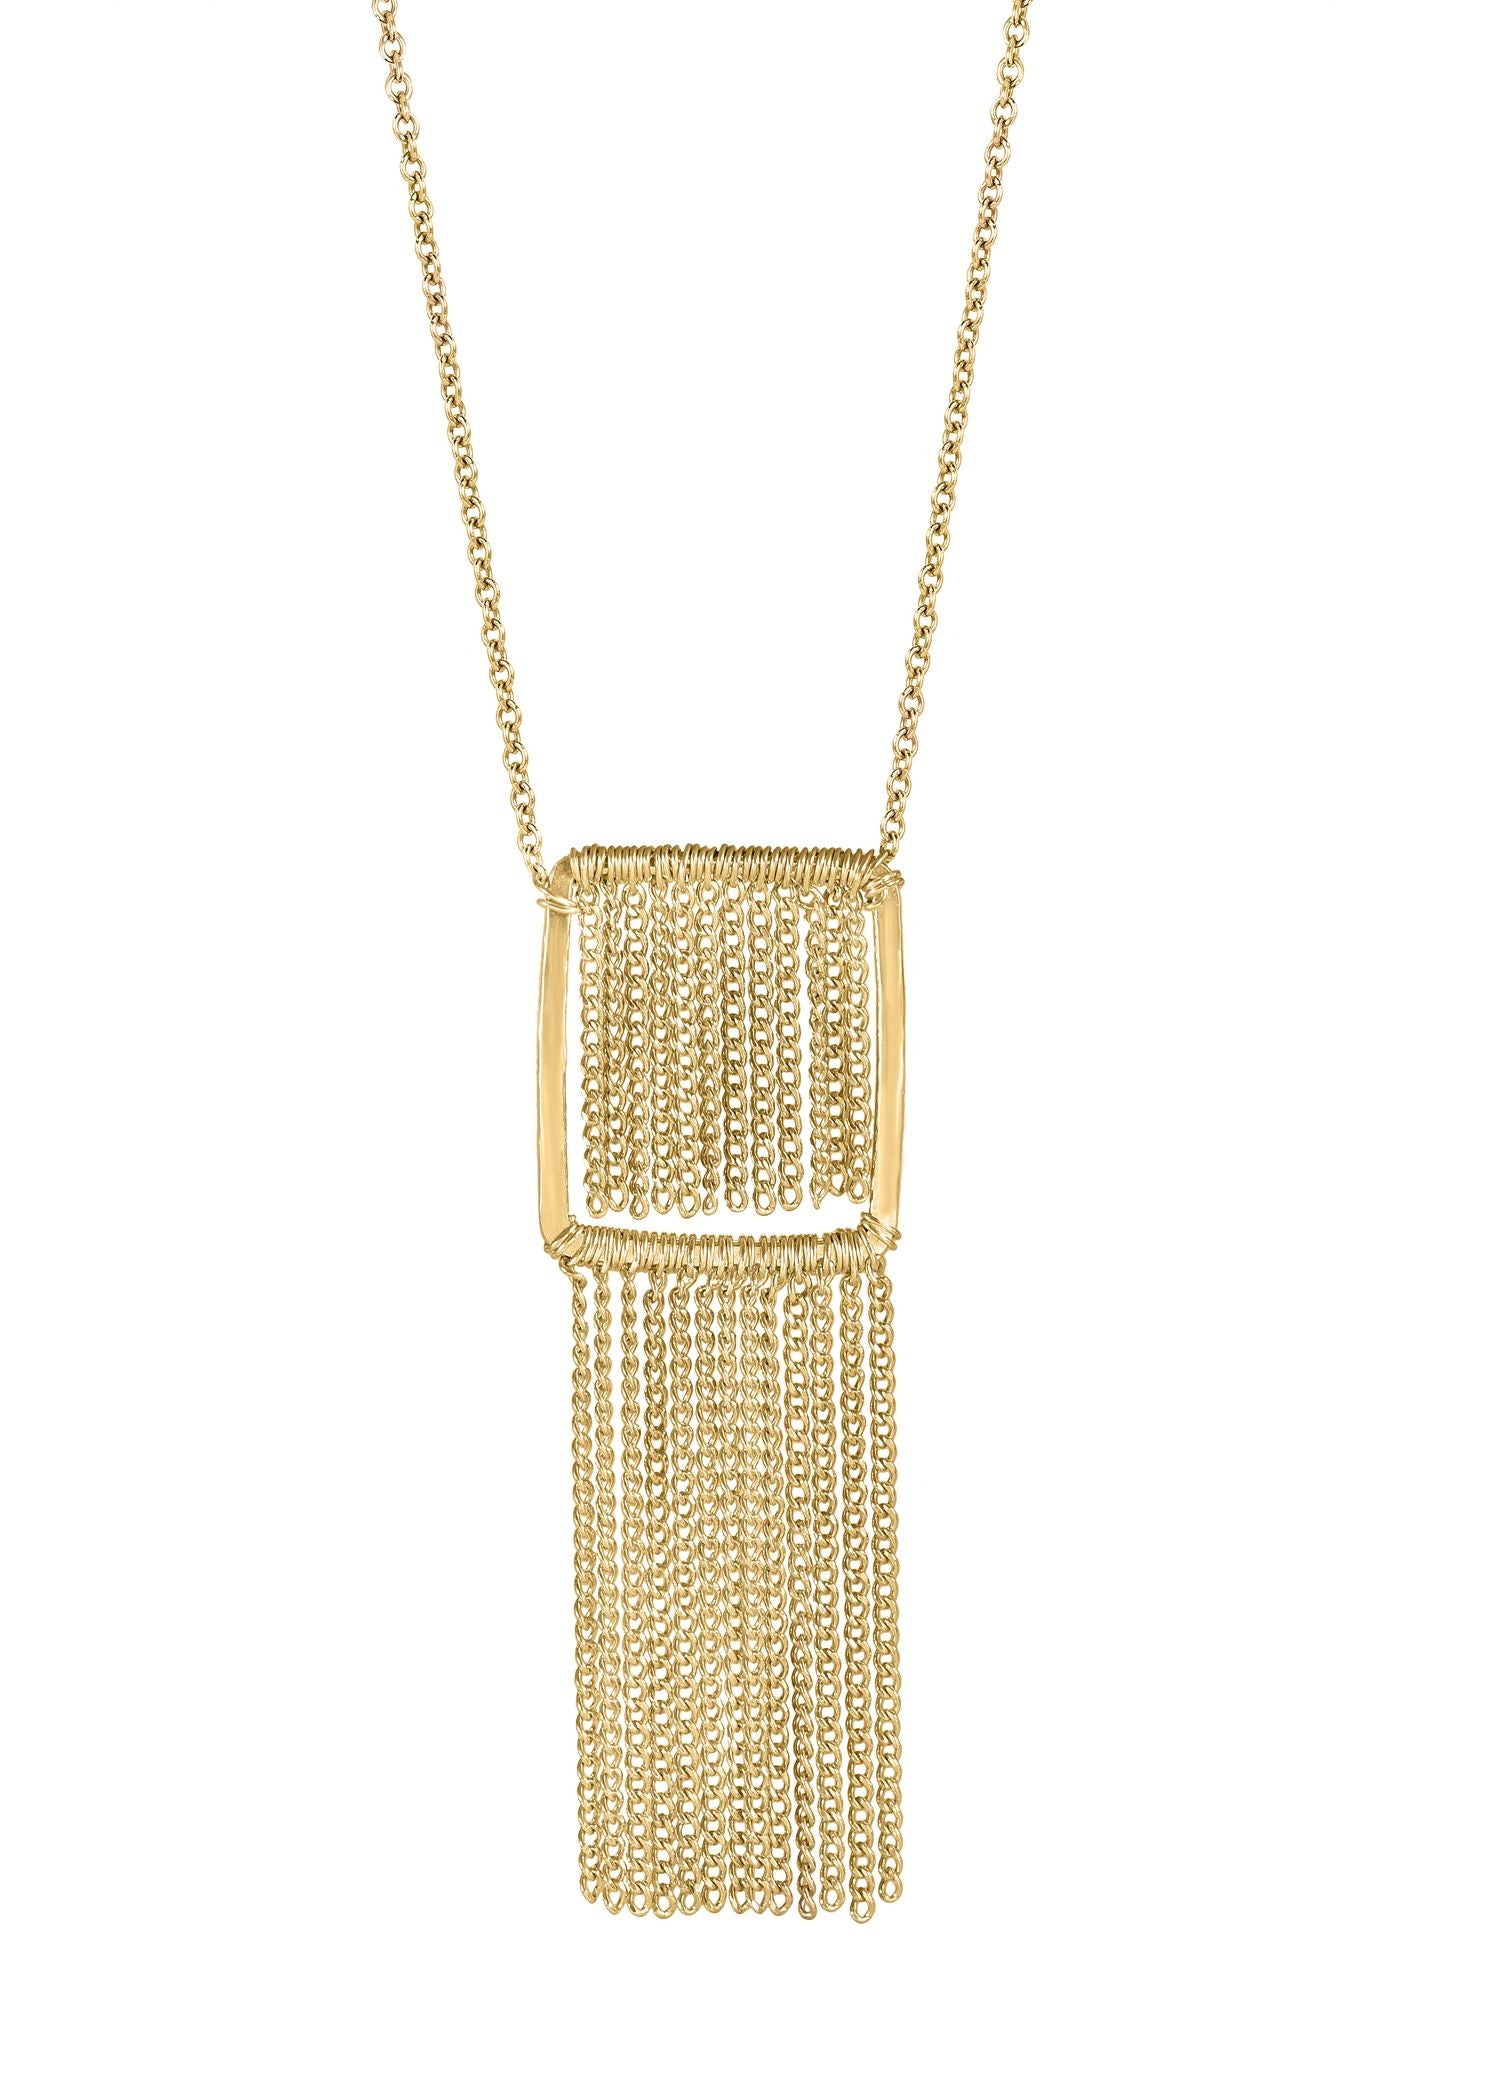 14k gold fill Necklace measures 16” in length Pendant measures 1-3/4” in length (including fringe) and 9/16” in width Handmade in our Los Angeles studio